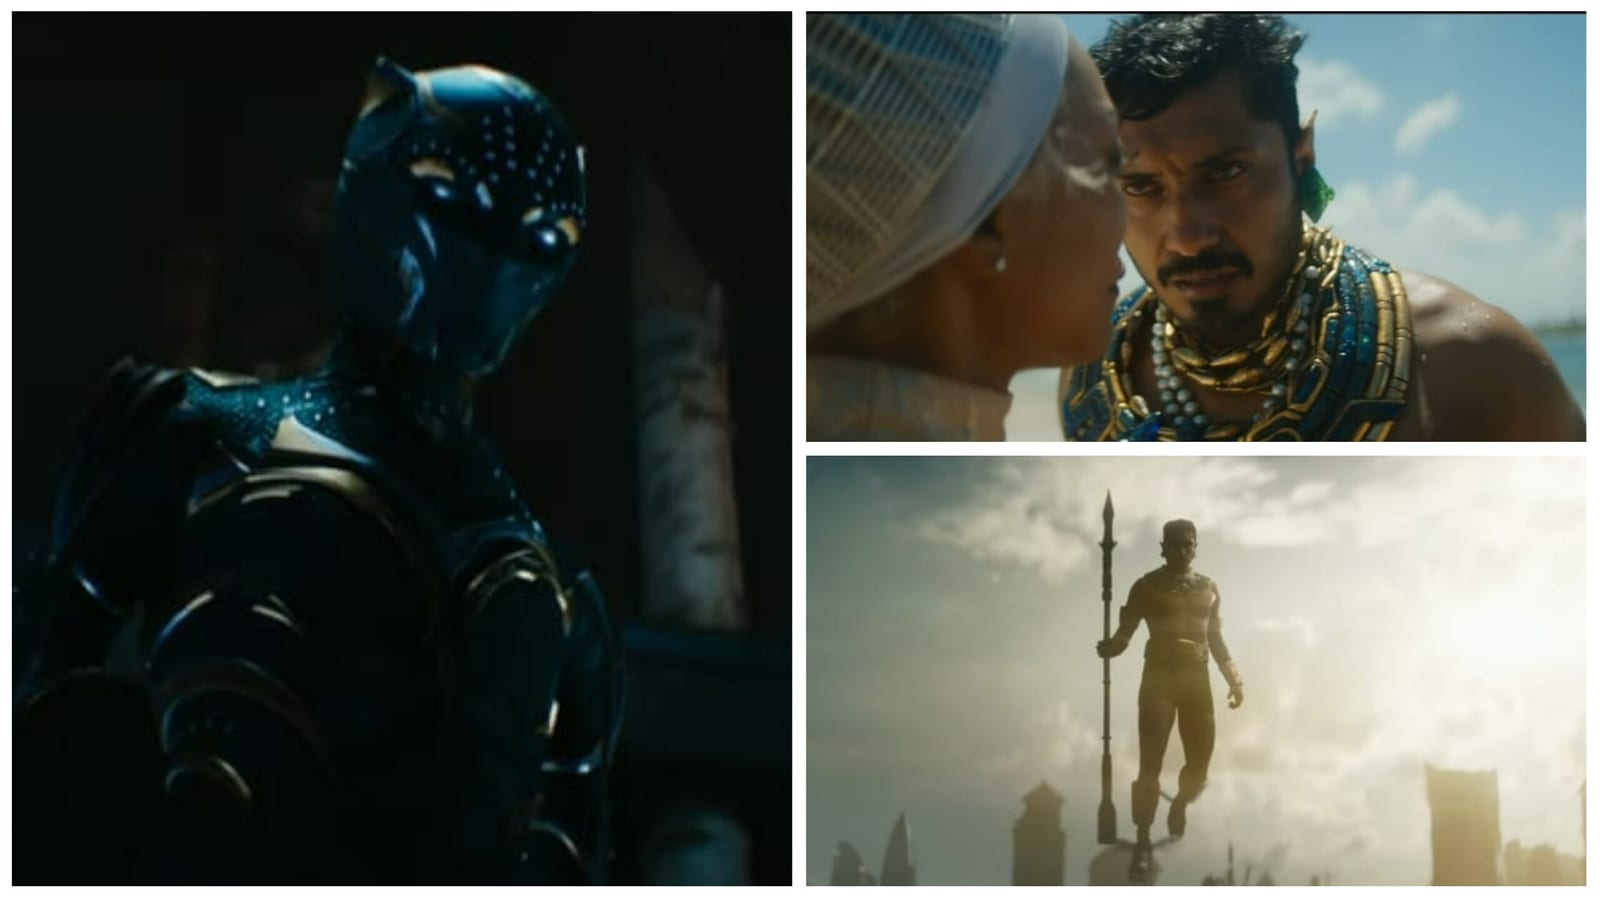 Black Panther Wakanda Forever trailer: Namor wages war on surface world, MCU introduces new Black Panther. Watch